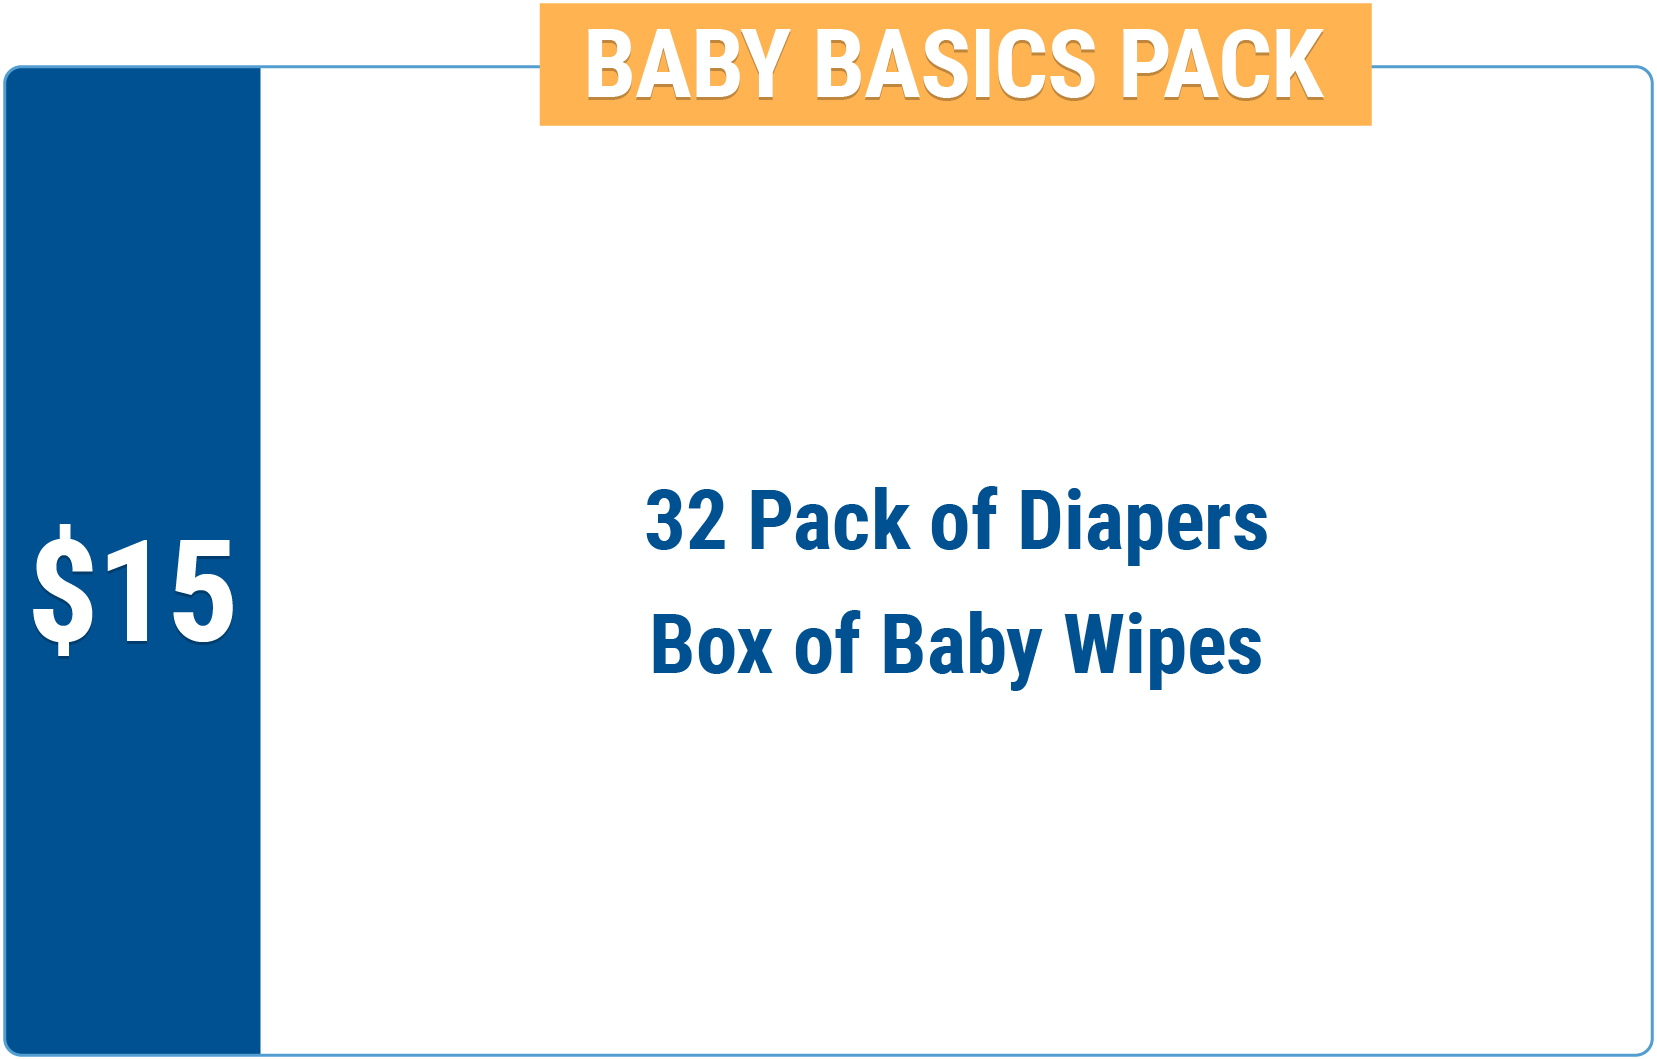 Donate 32 Packs of Diapers, Box of Baby Wipes for 15$